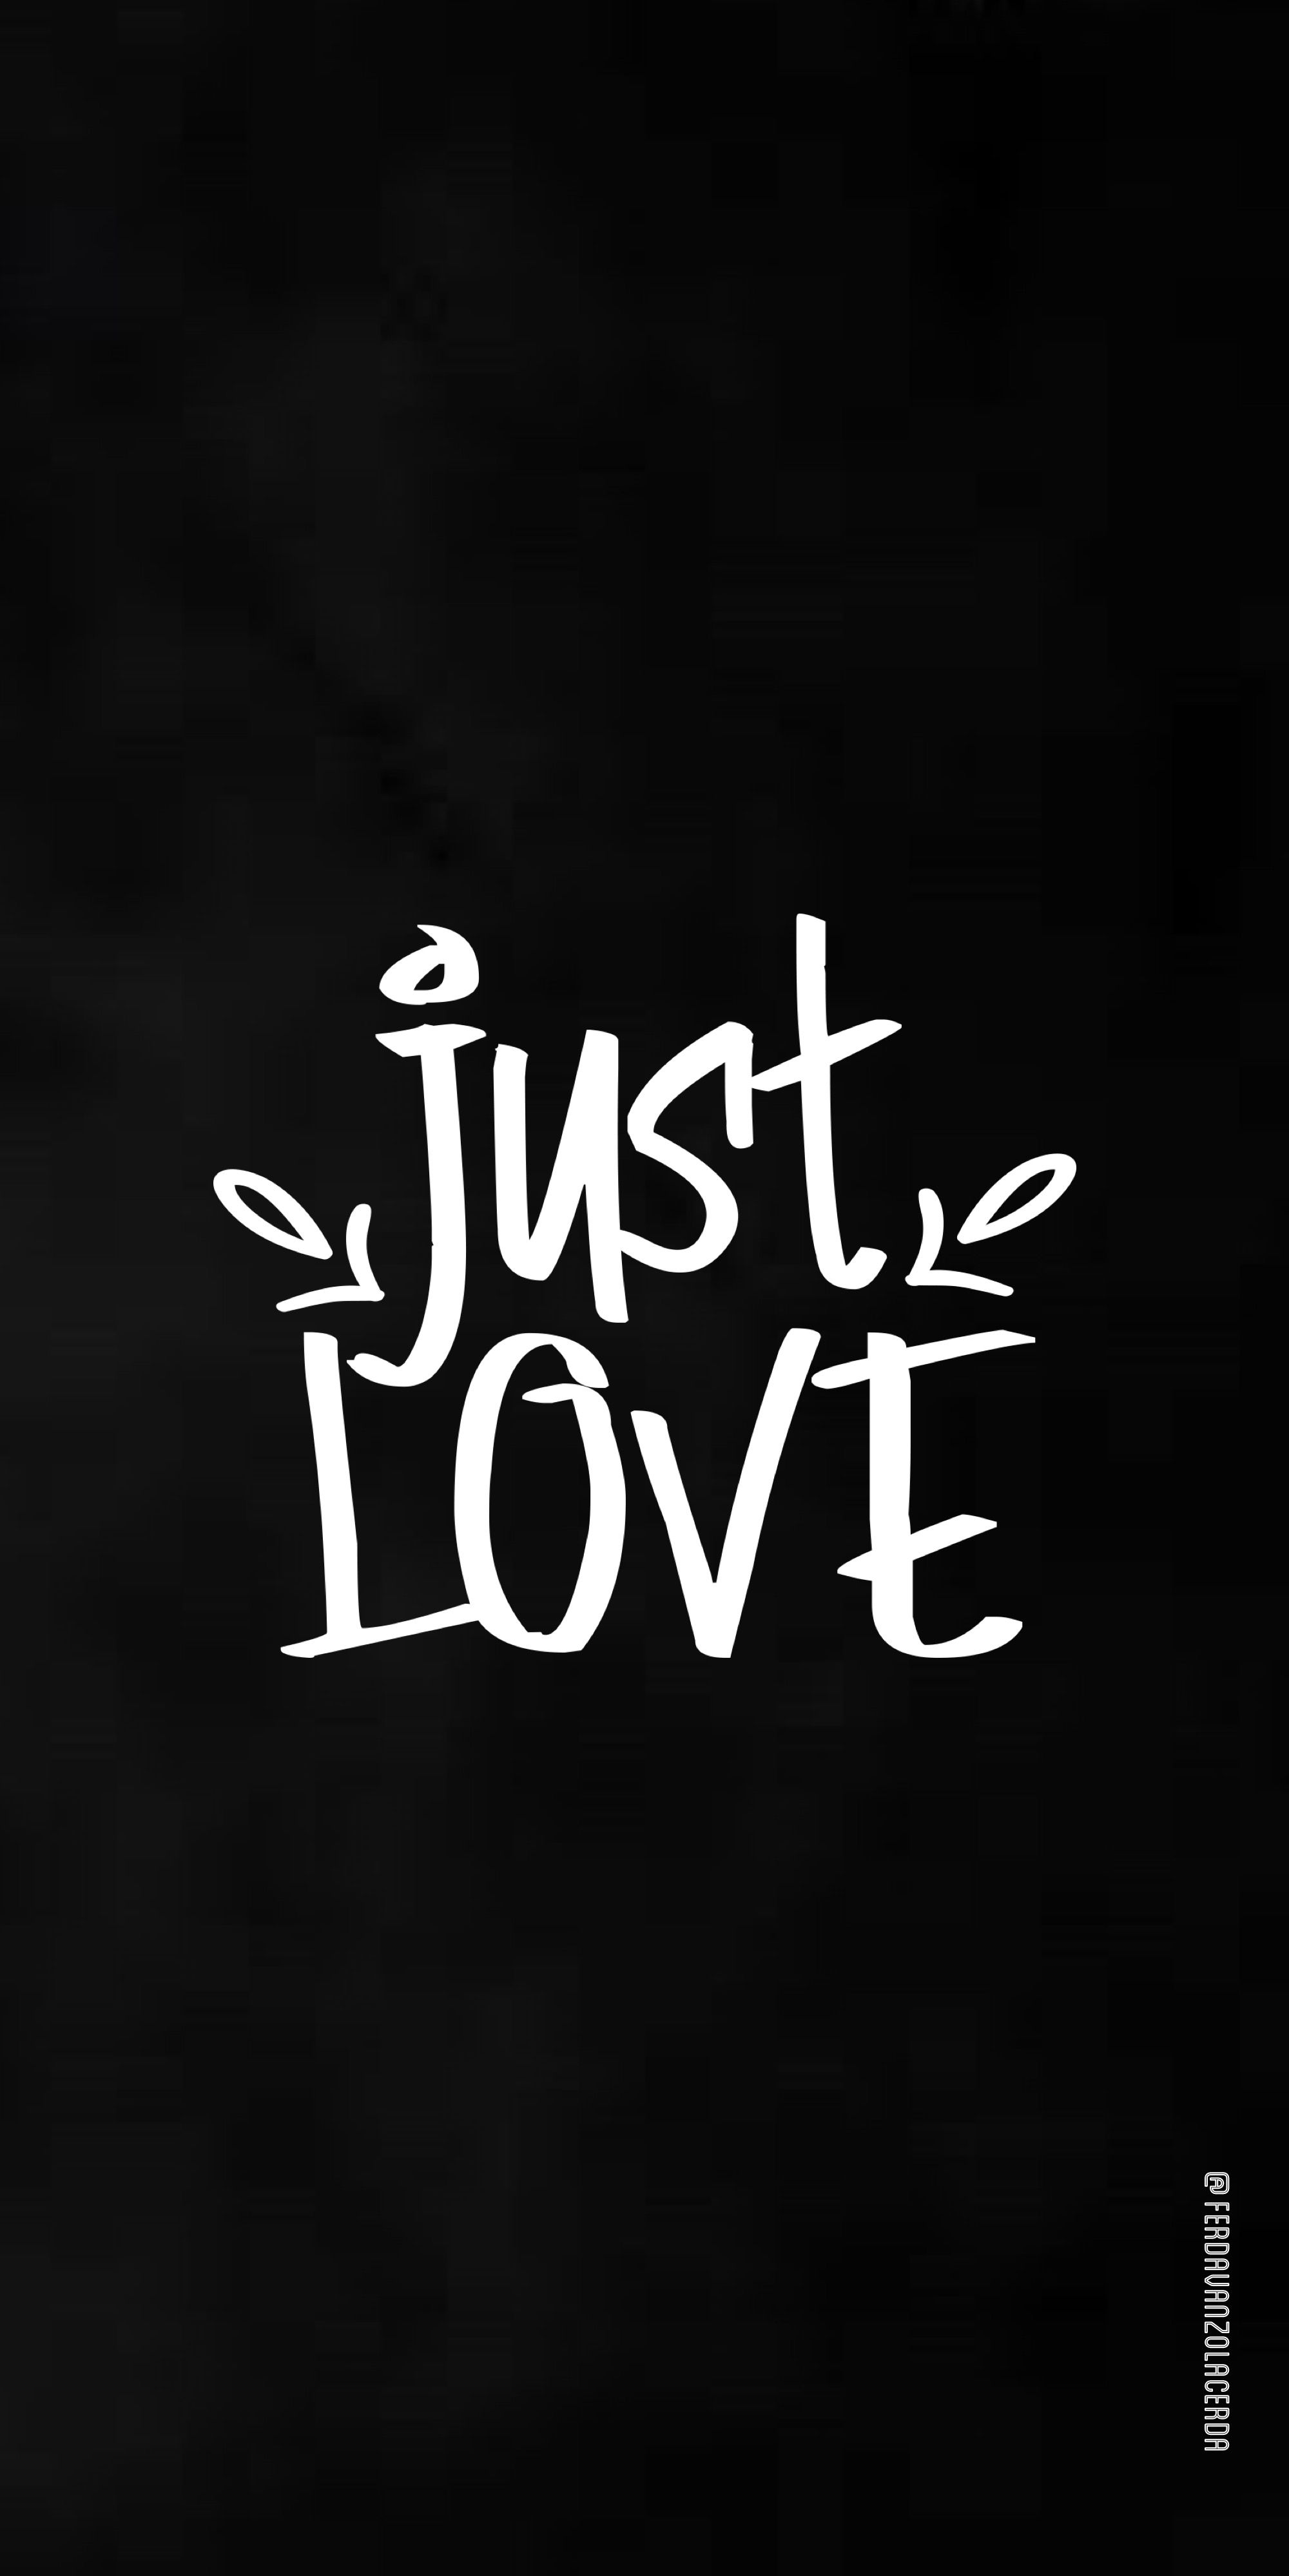 Just love. Life quotes, Just love, Love background